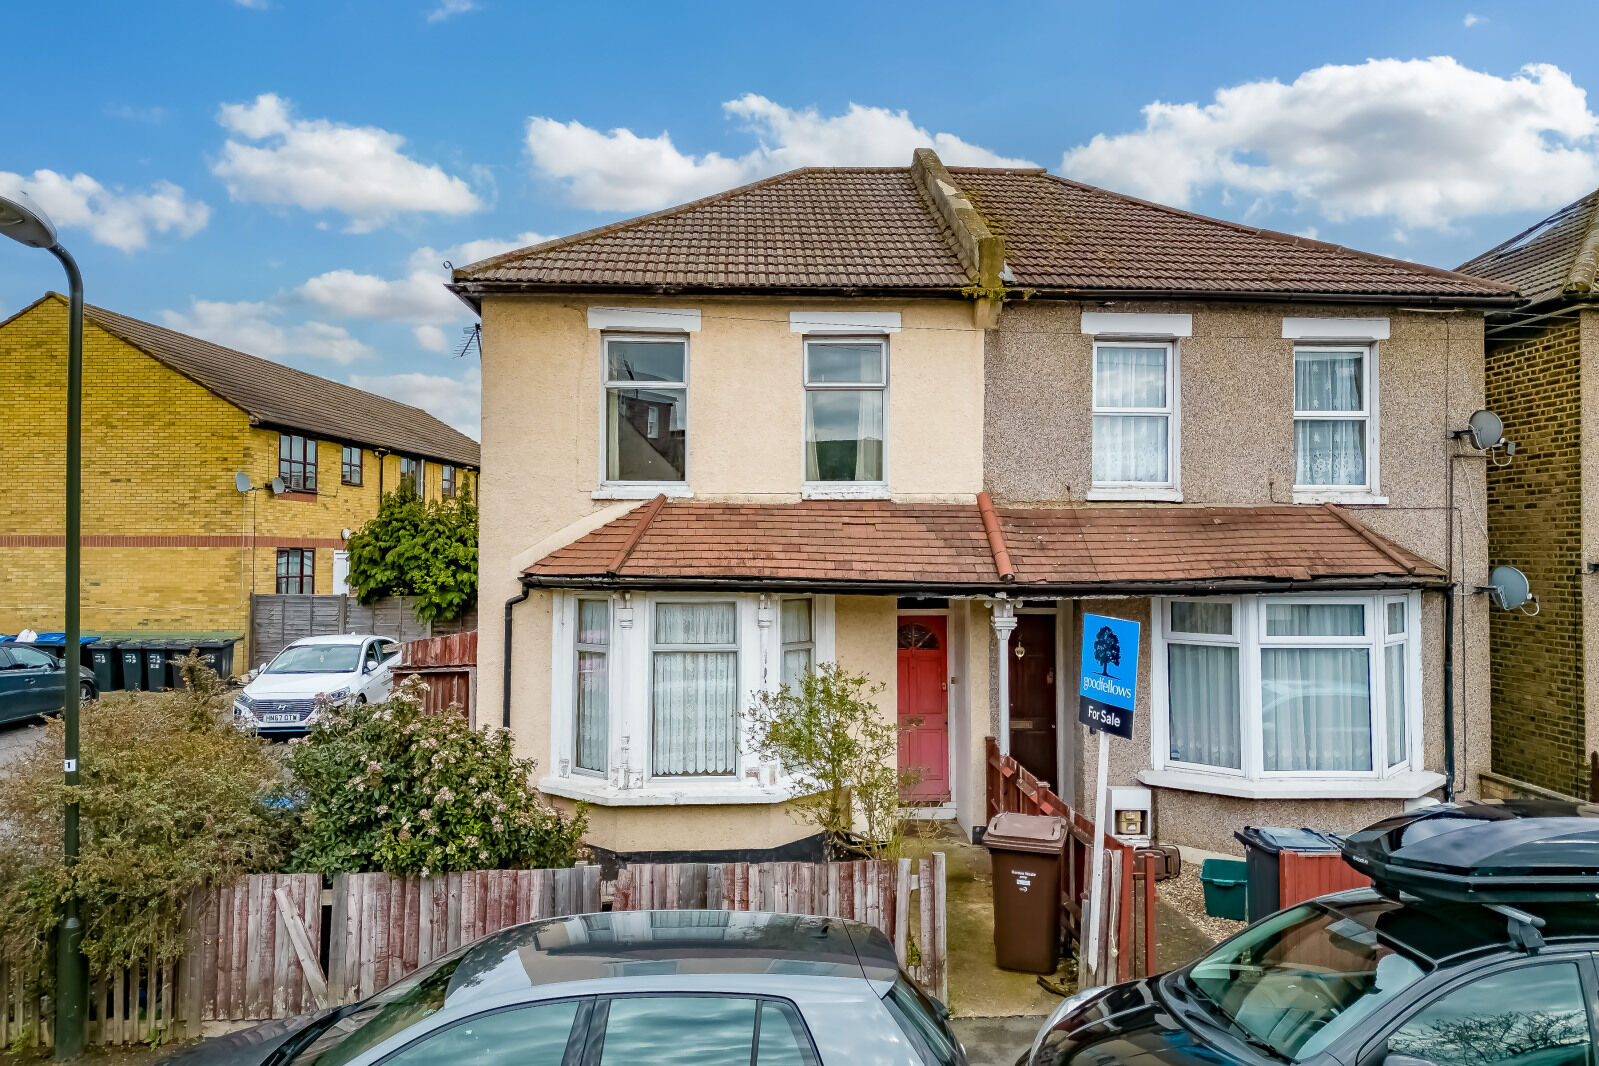 3 bedroom semi detached house for sale Kings Road, Mitcham, CR4, main image